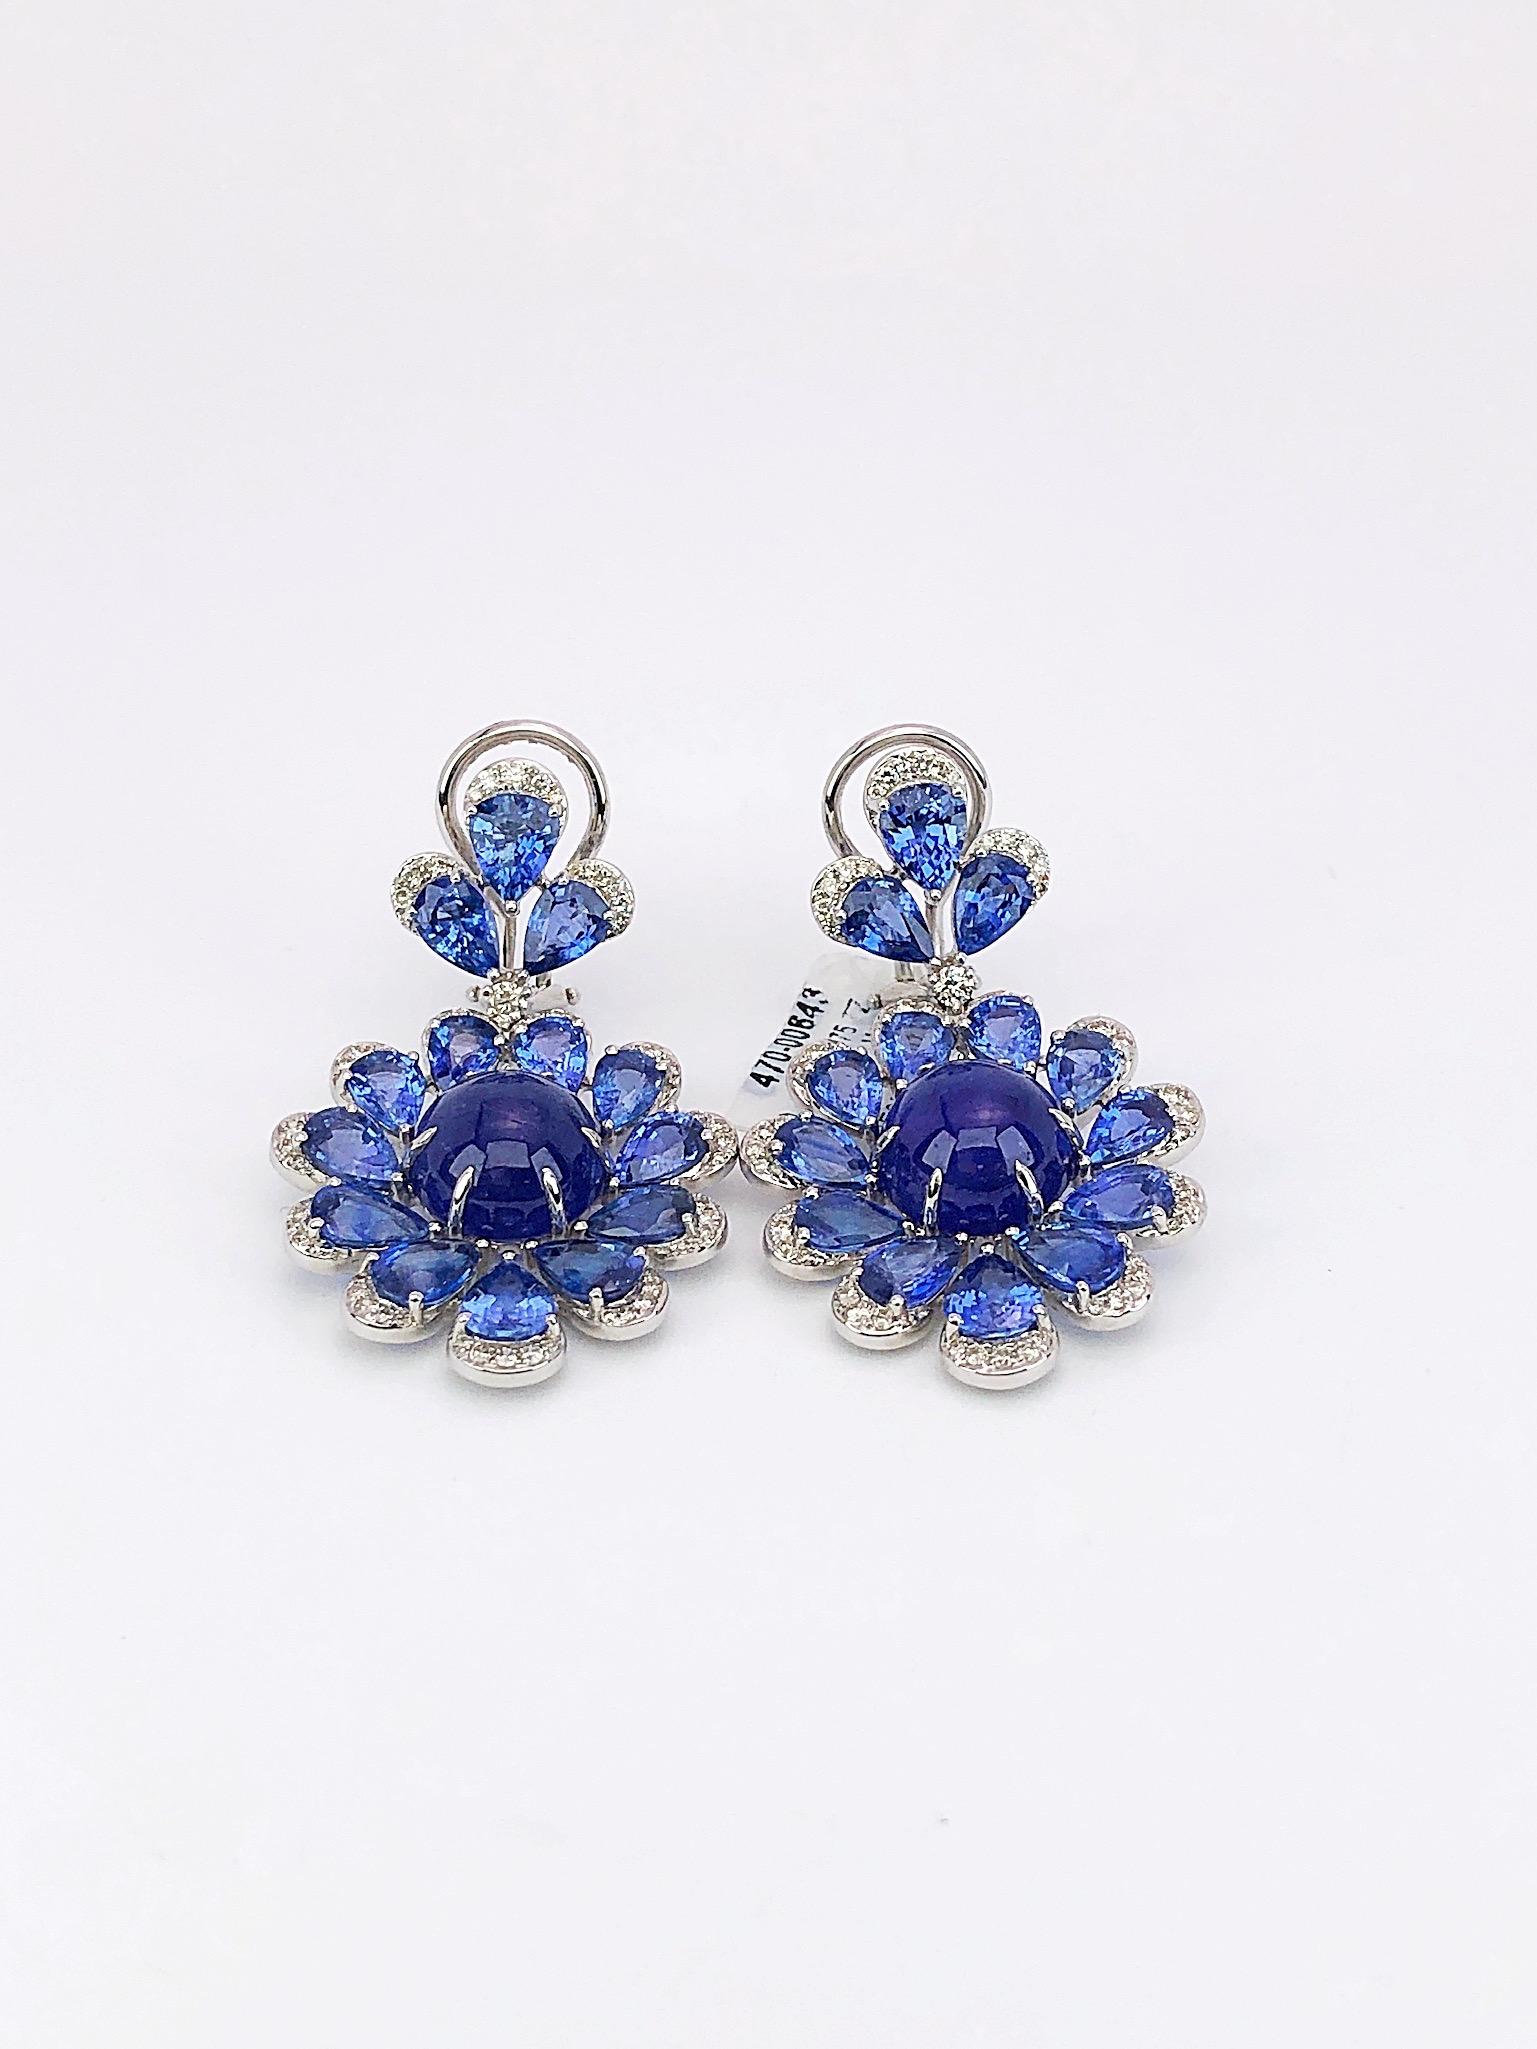 These stunning earrings are  composed of round cabochon tanzanite centers that are surrounded by pear shaped blue sapphires, and accented with round brilliant diamonds. Set in 18-karat white gold.
The earrings are 1.75